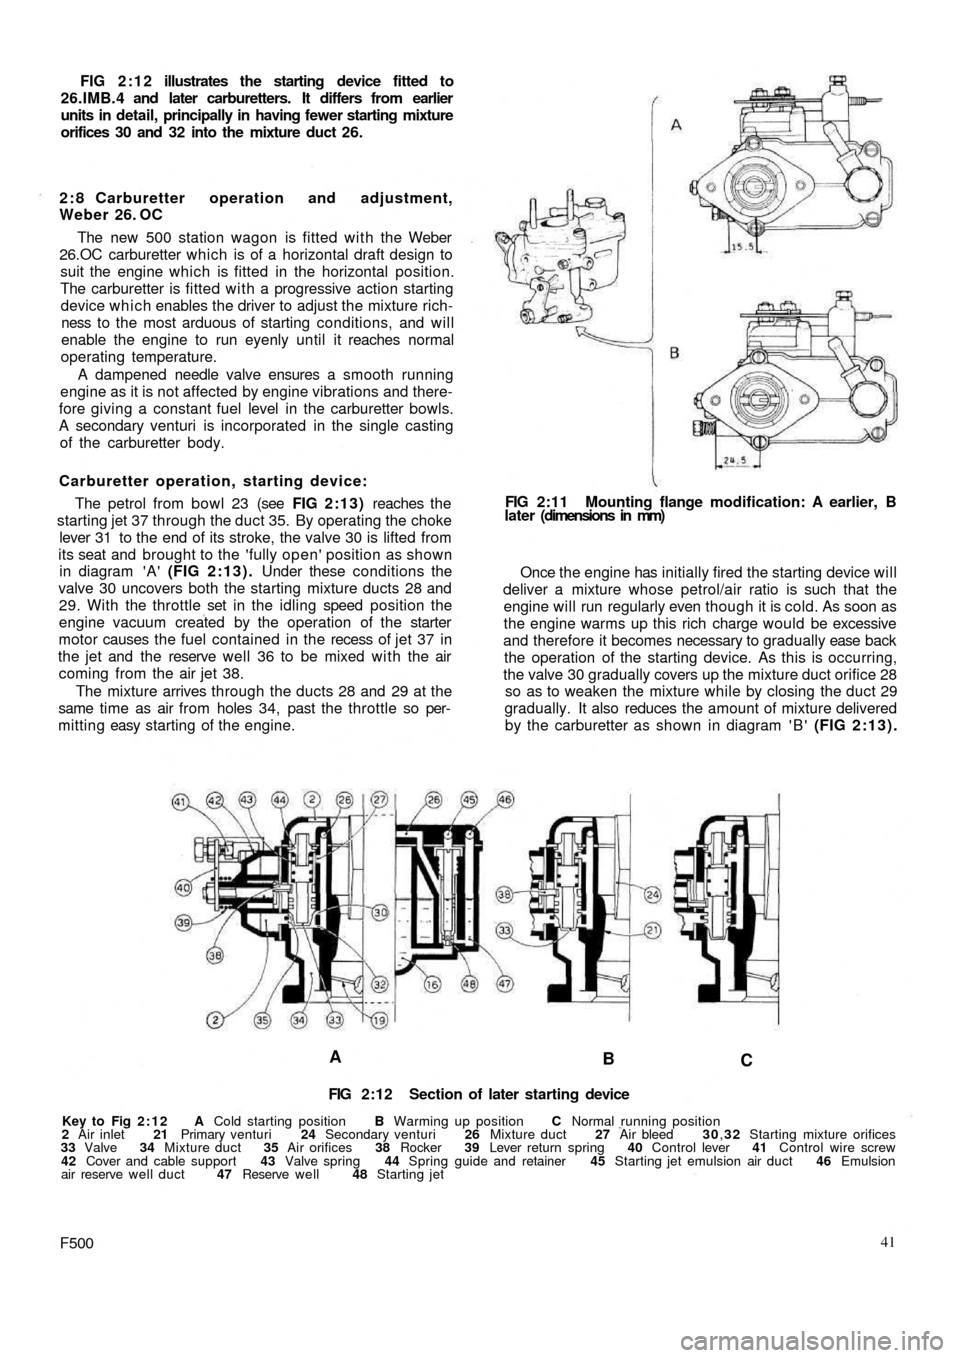 FIAT 500 1959 1.G Workshop Manual FIG 2:12 illustrates the starting device fitted to
26.IMB.4 and later carburetters. It differs from earlier
units in detail, principally in having fewer starting mixture
orifices 30 and 32 into the mi